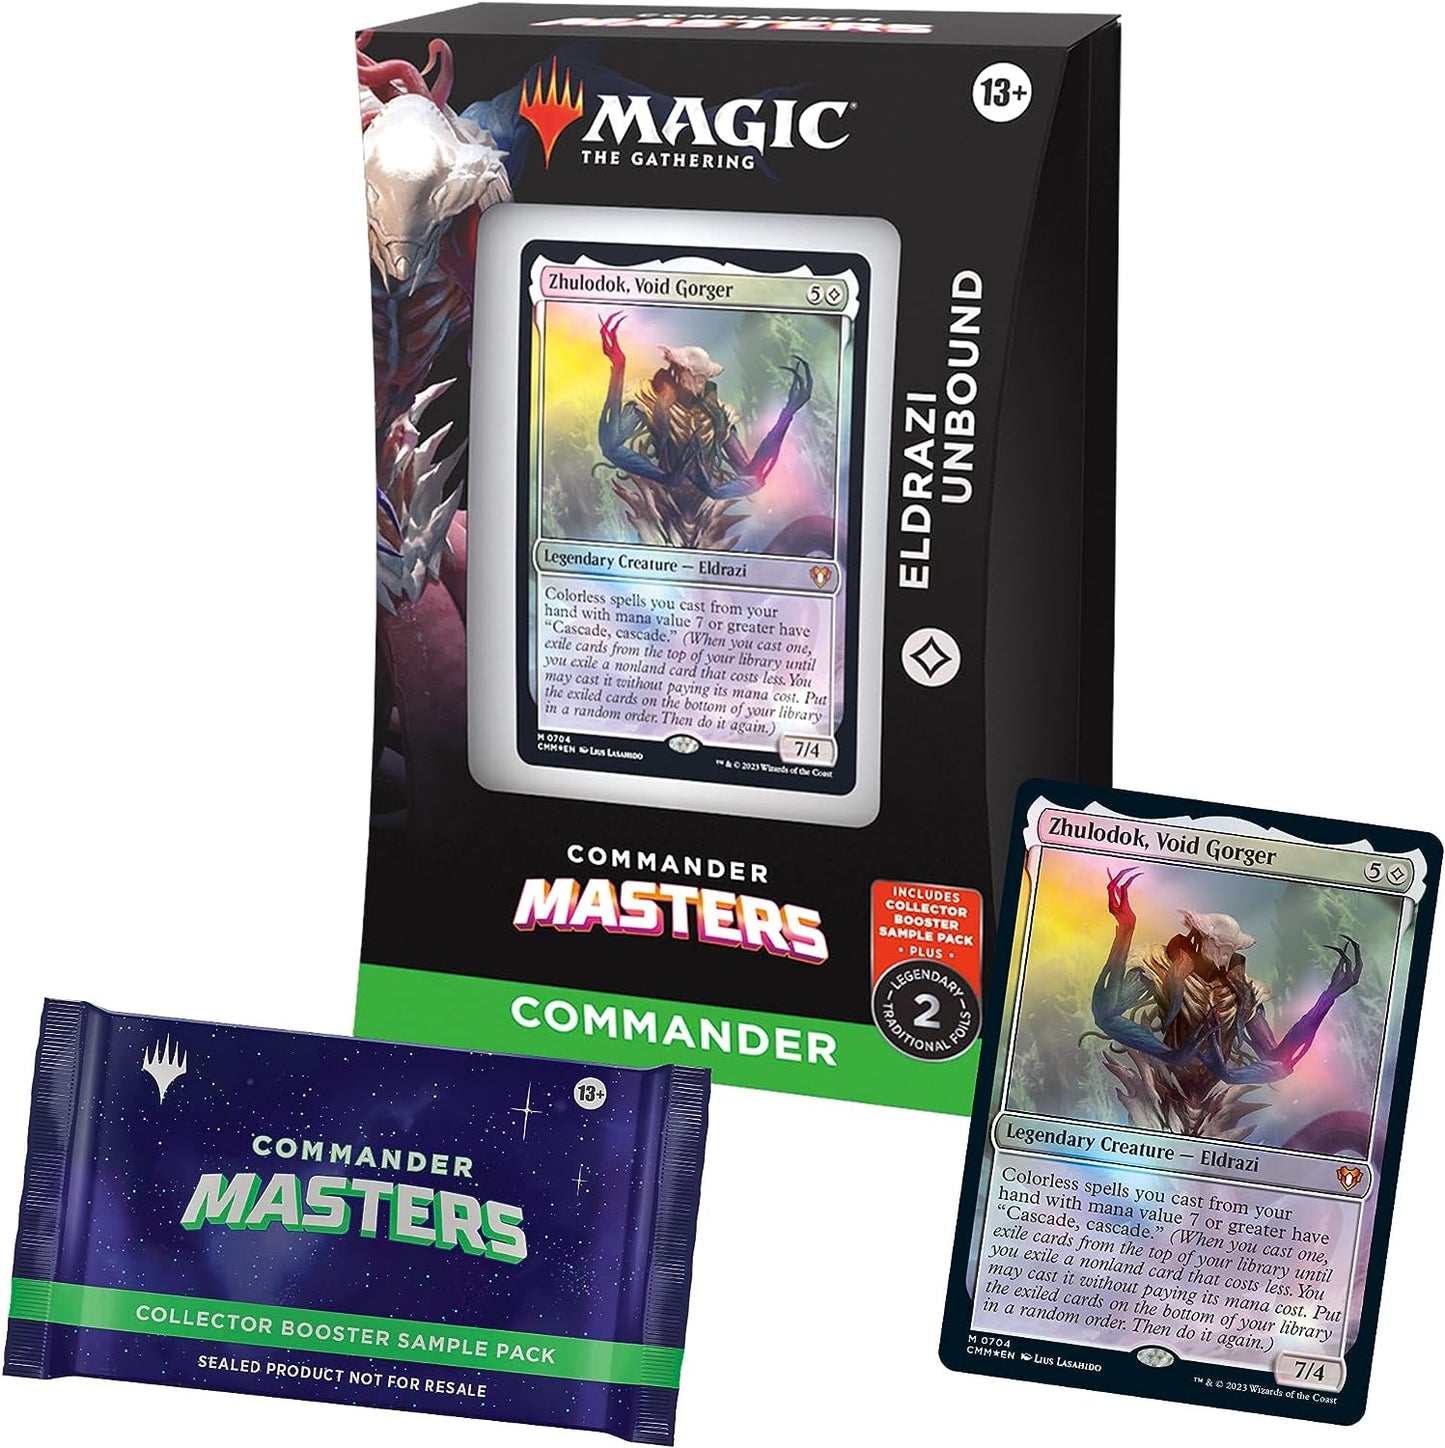 Magic The Gathering Commander Masters Commander Deck - Silver Swarm - Silver Swarm - Silver Swarm - Silver Swarm - Silver Swarm